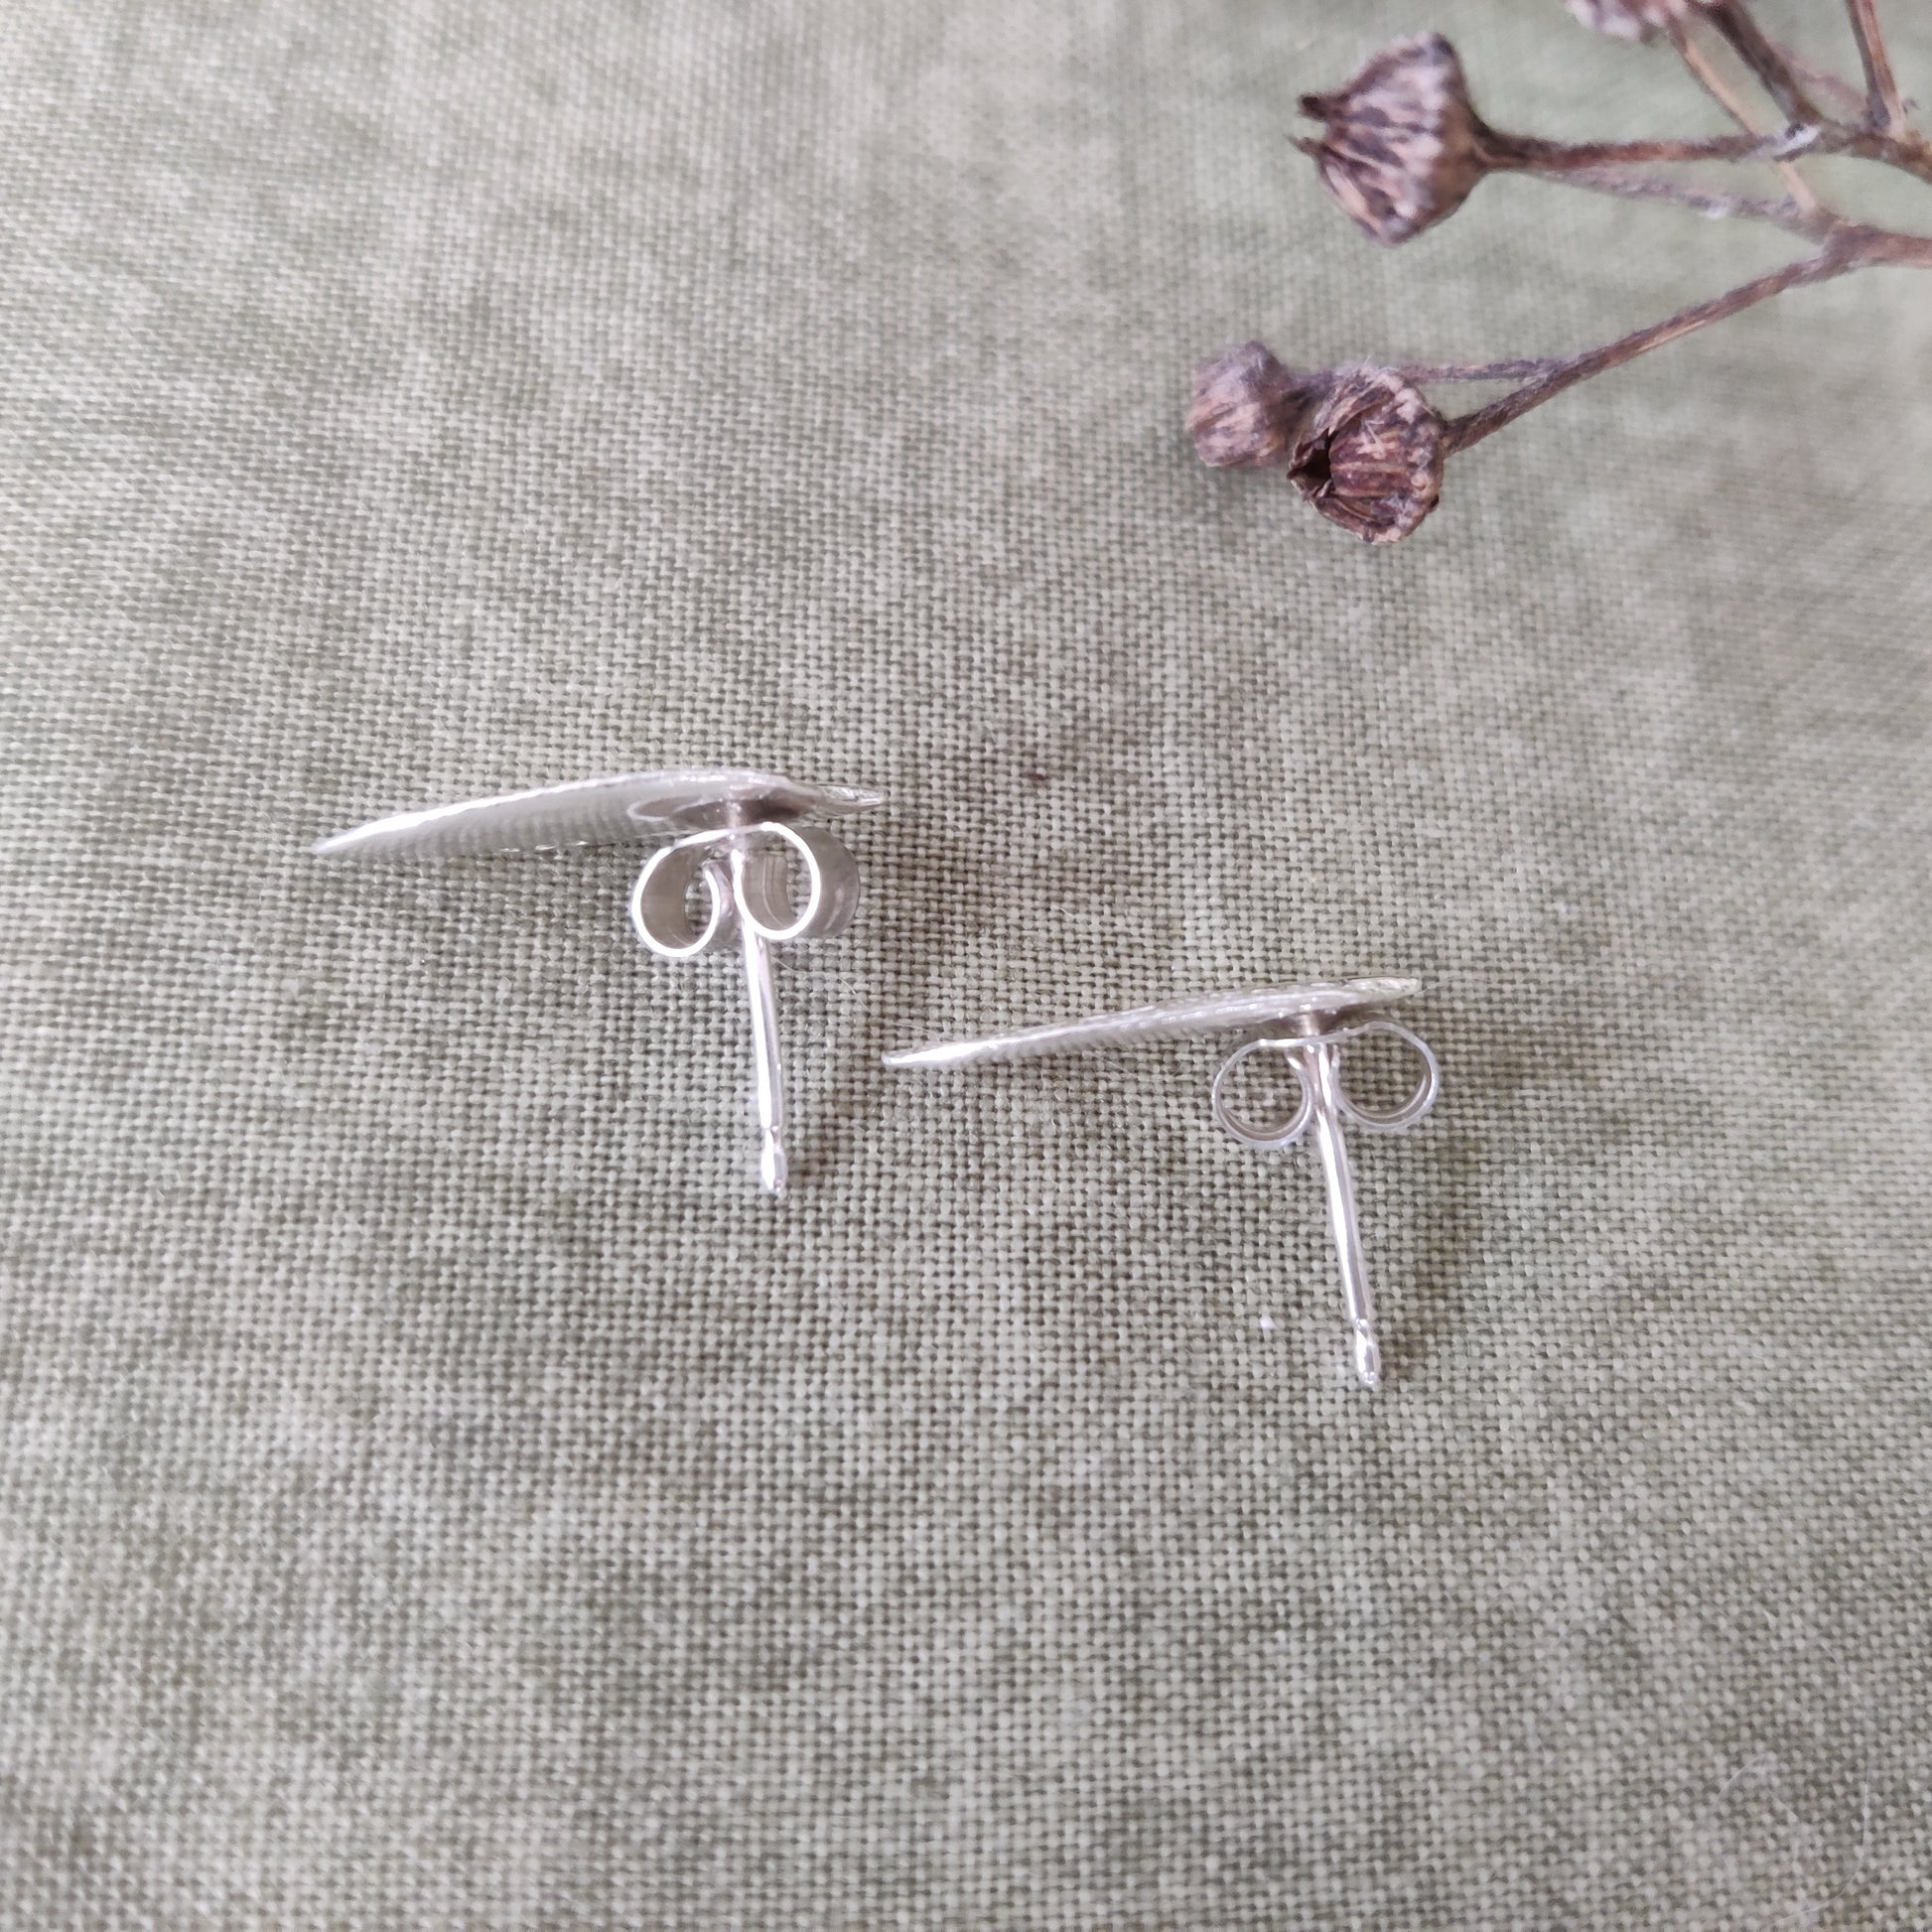 Woodland inspired 925 silver earrings studs